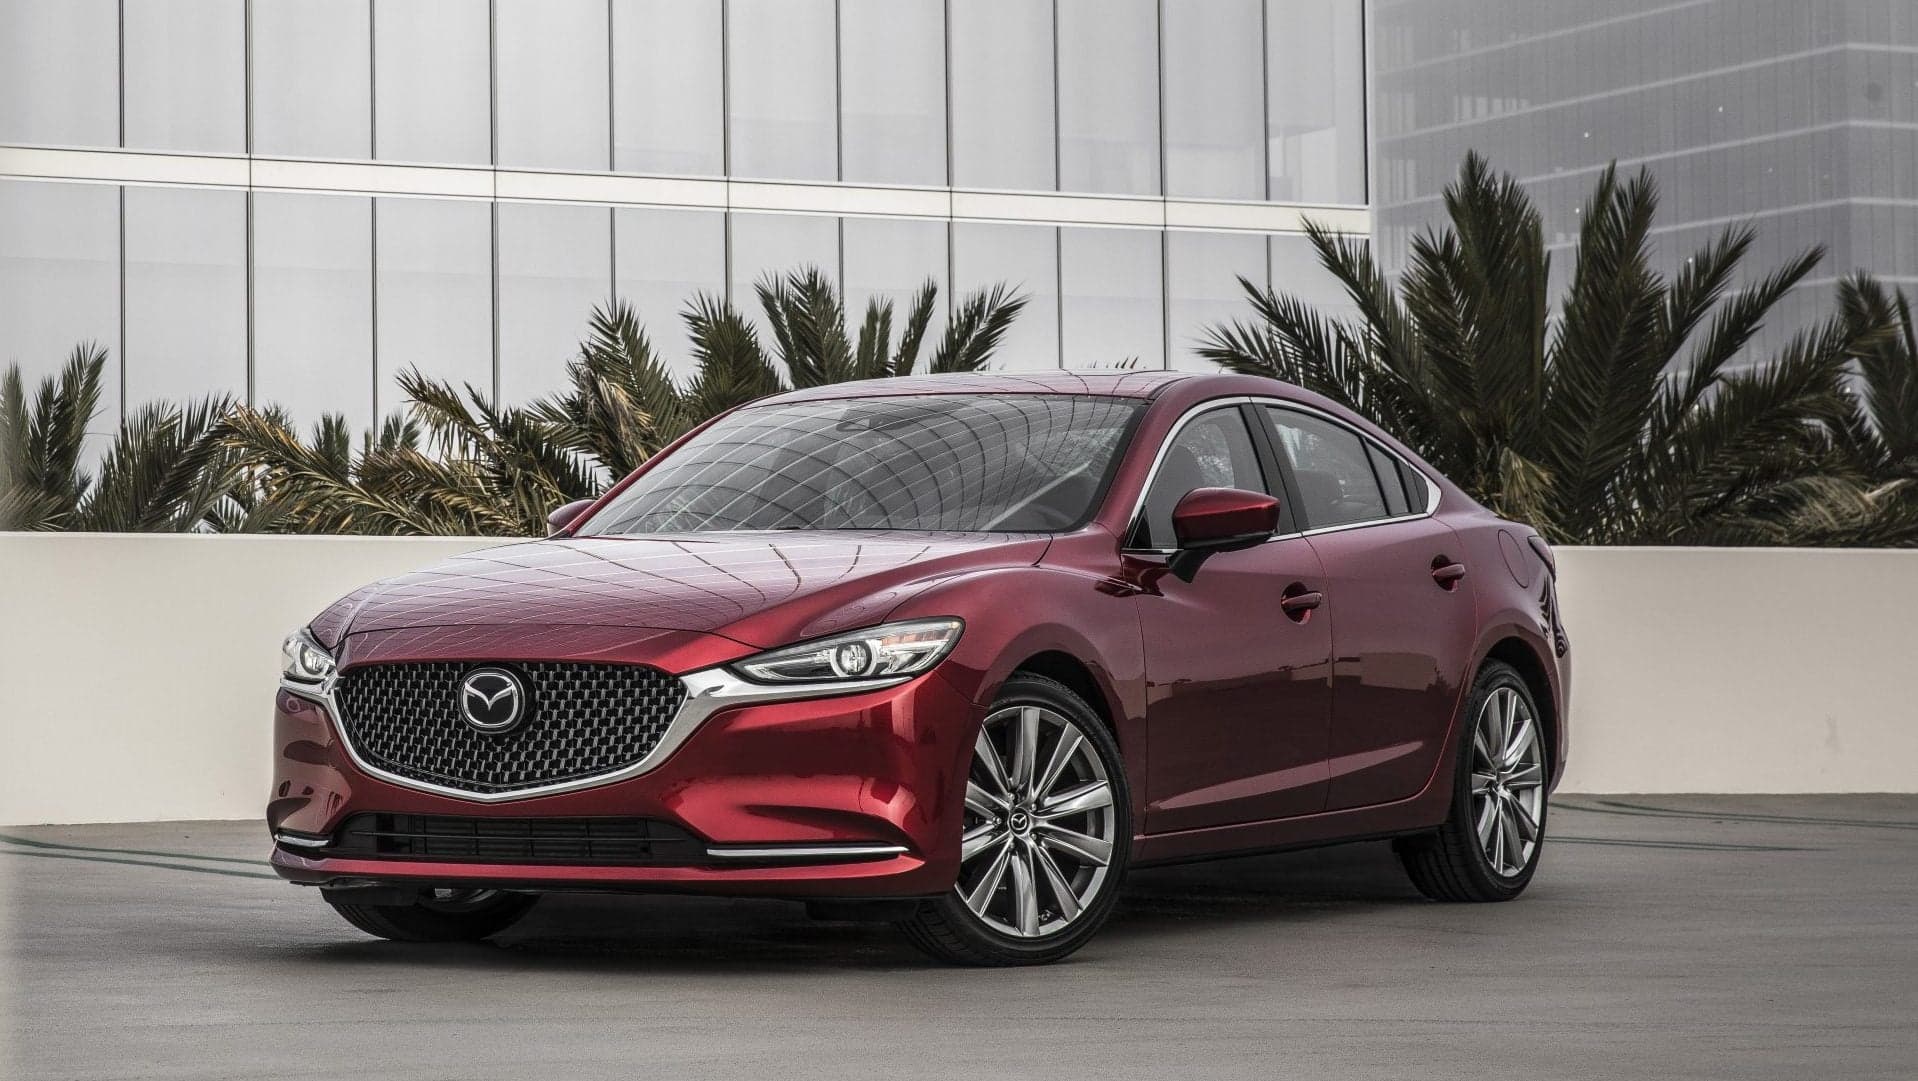 Mazda Doles out Fresh Information on the 2018 Mazda6